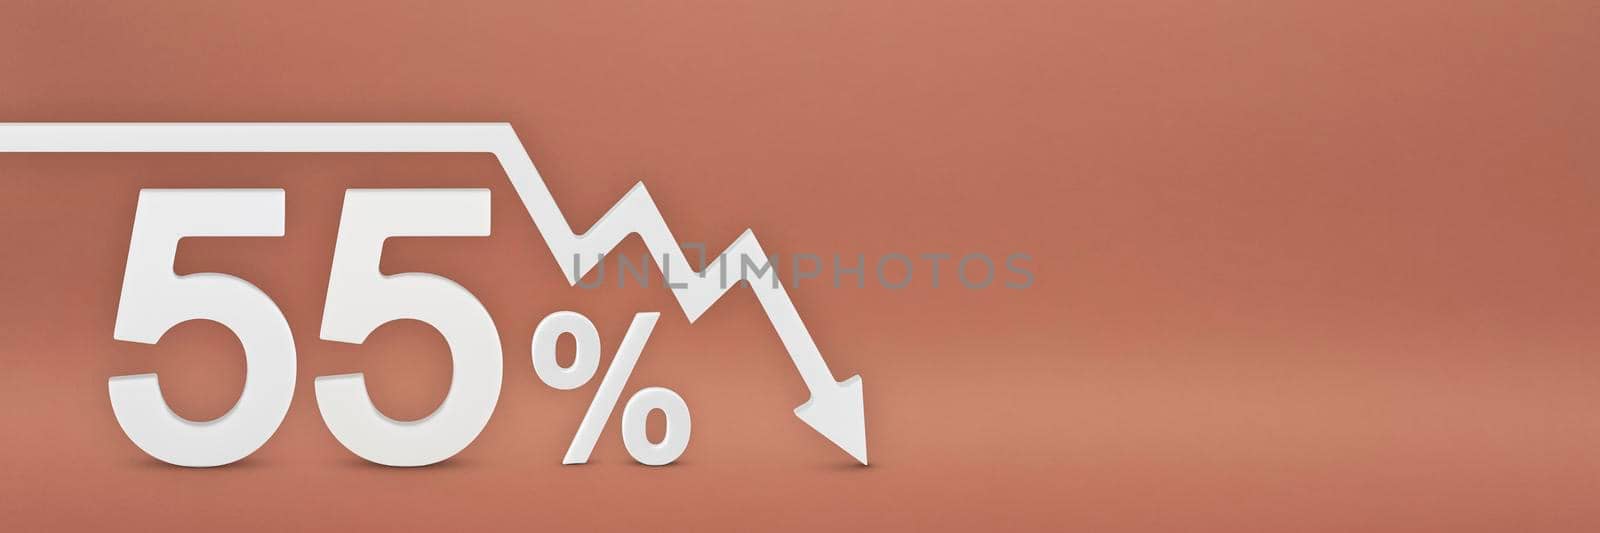 fifty-five percent, the arrow on the graph is pointing down. Stock market crash, bear market, inflation.Economic collapse, collapse of stocks.3d banner,55 percent discount sign on a red background. by SERSOL